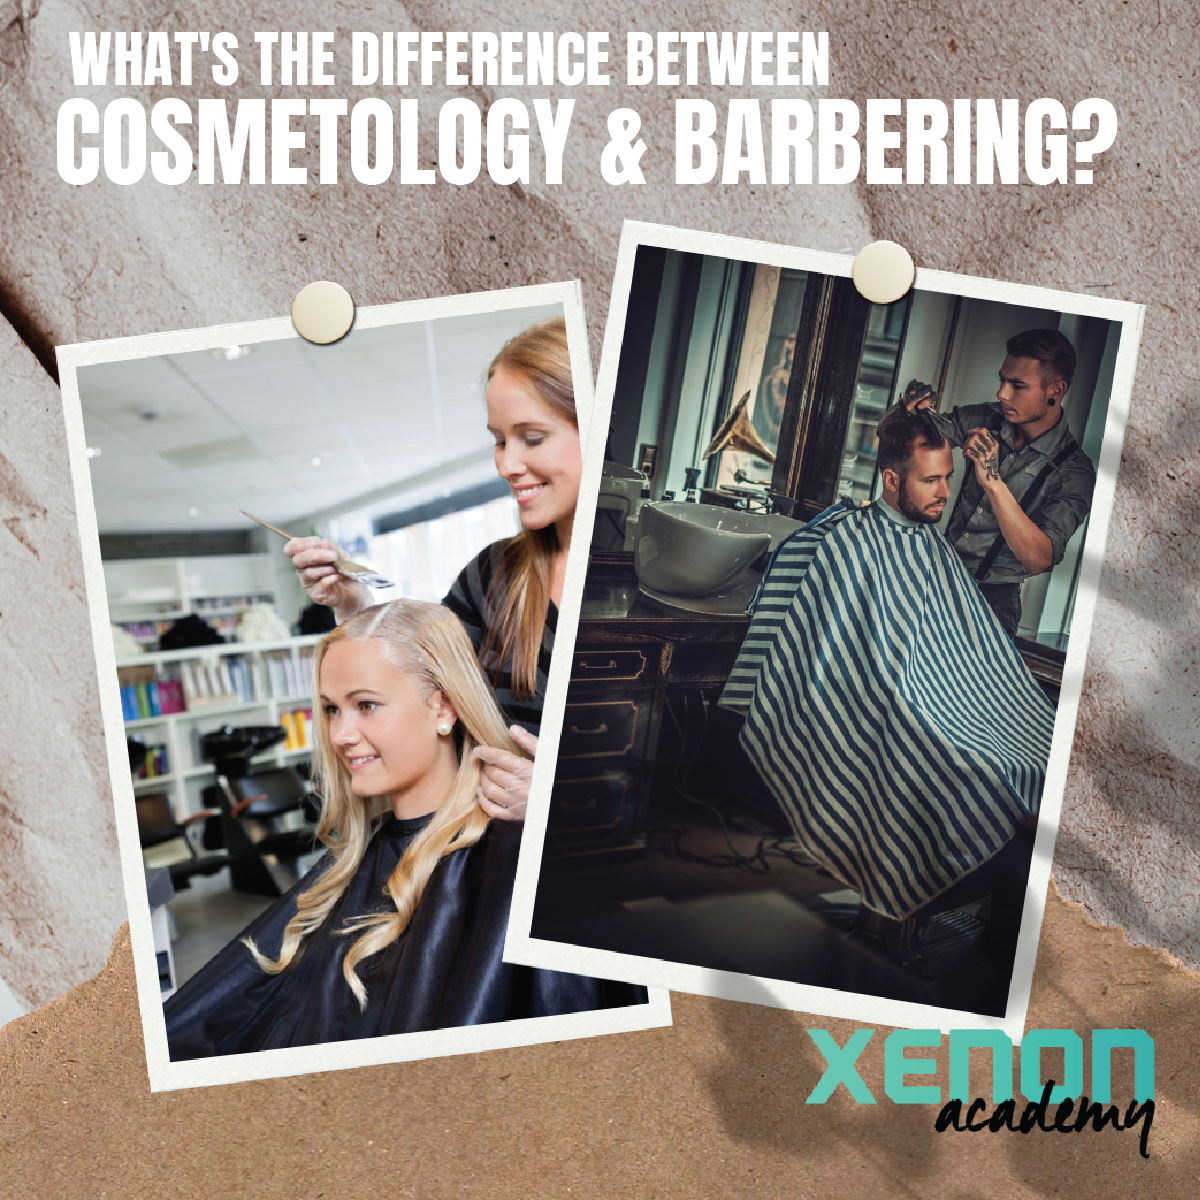 What's the difference between cosmetology and barbering?